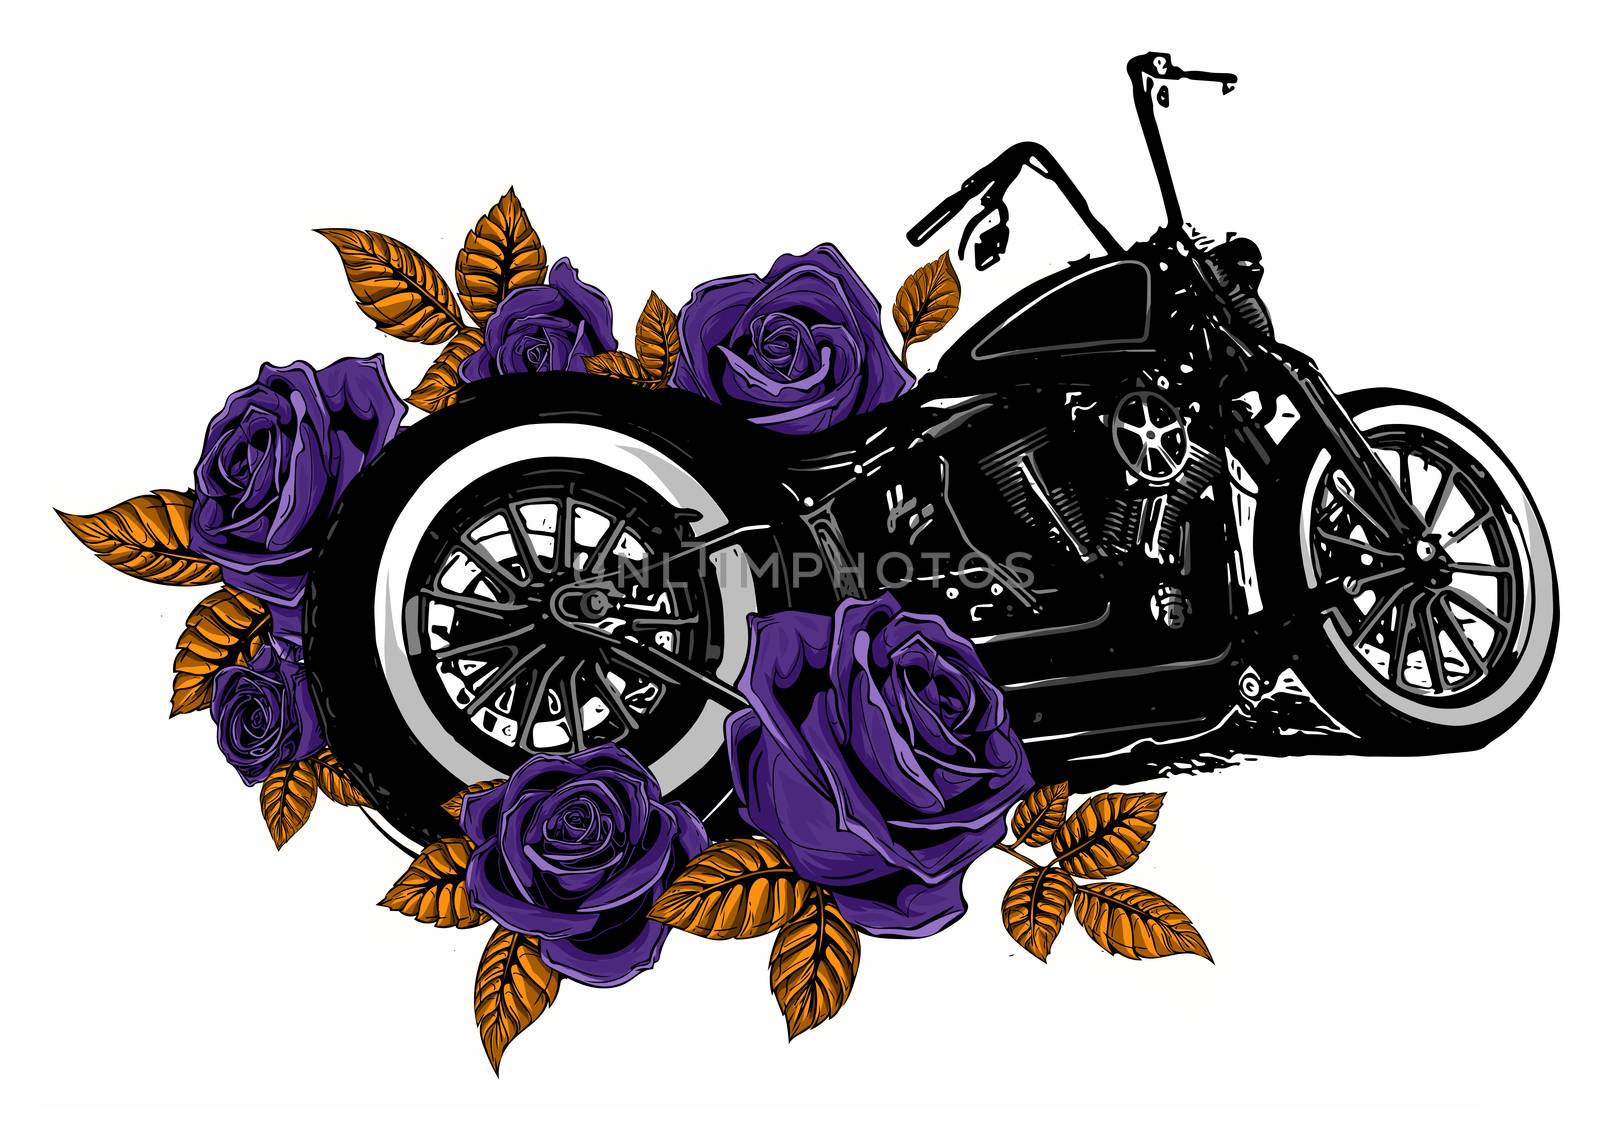 motorcycle bike with roses and peonies, card frame by dean